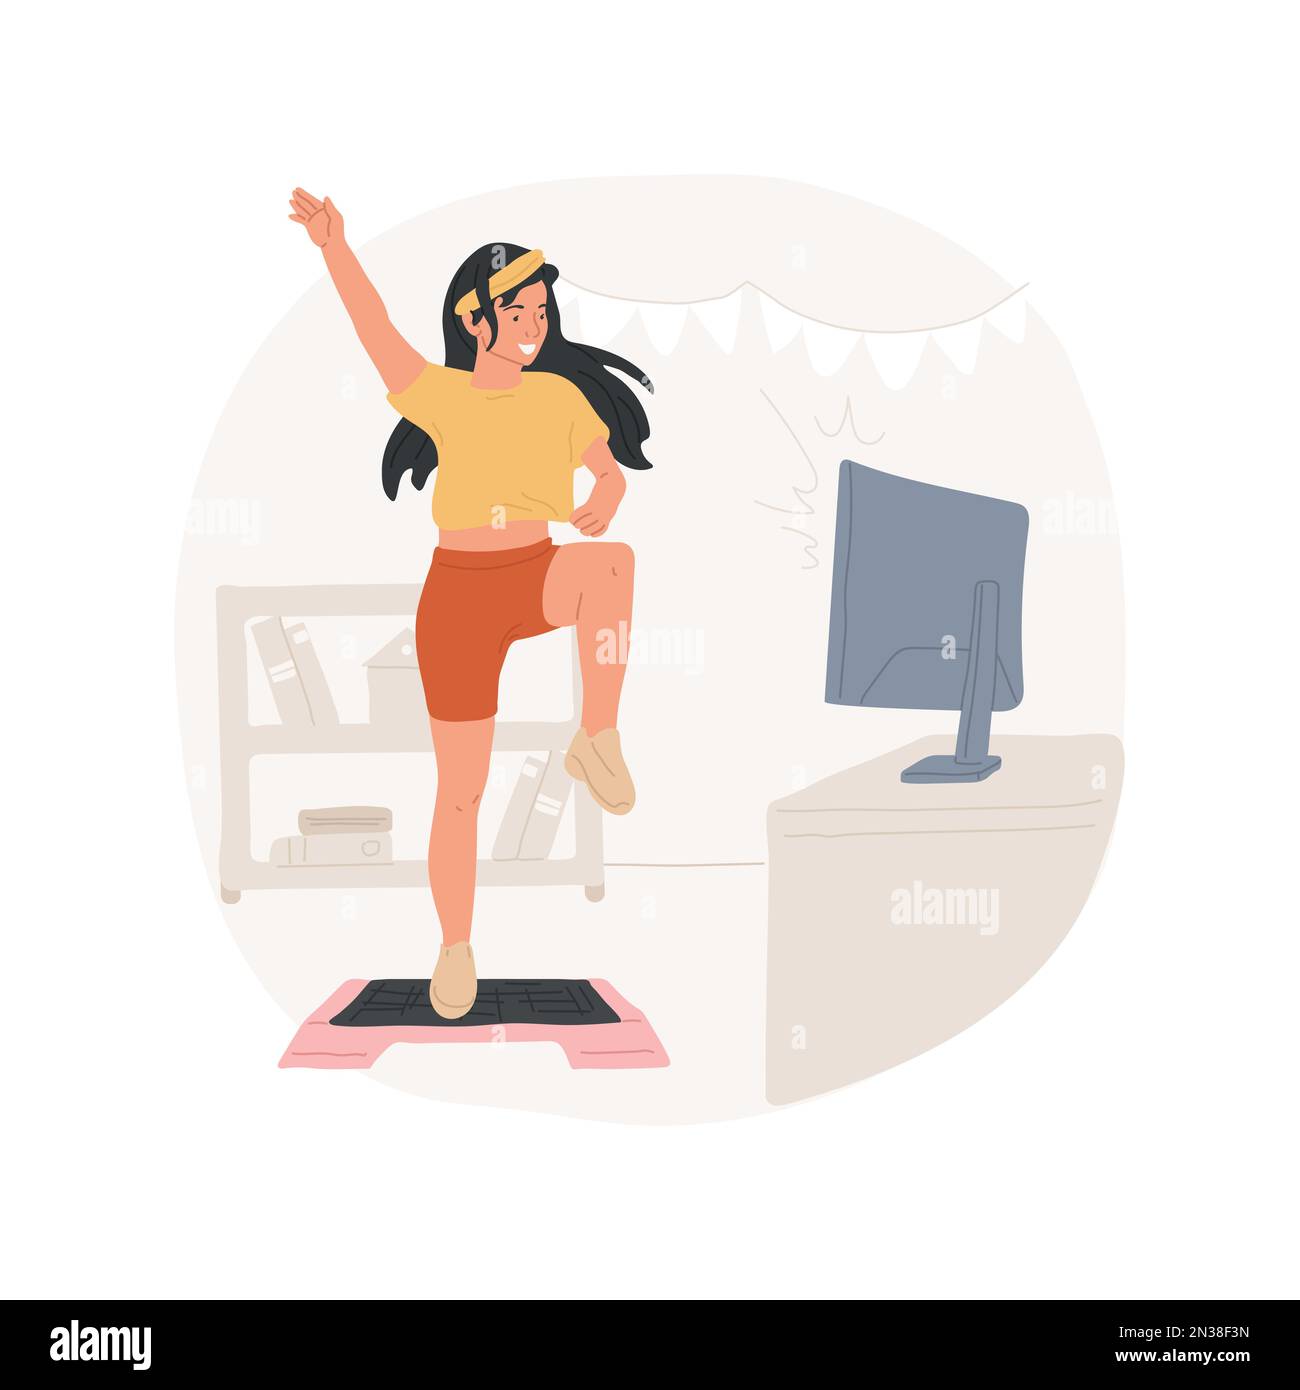 Step aerobics isolated cartoon vector illustration. Sporty young woman doing step aerobics using online lessons, people active lifestyle during pandemic, physical activity vector cartoon. Stock Vector